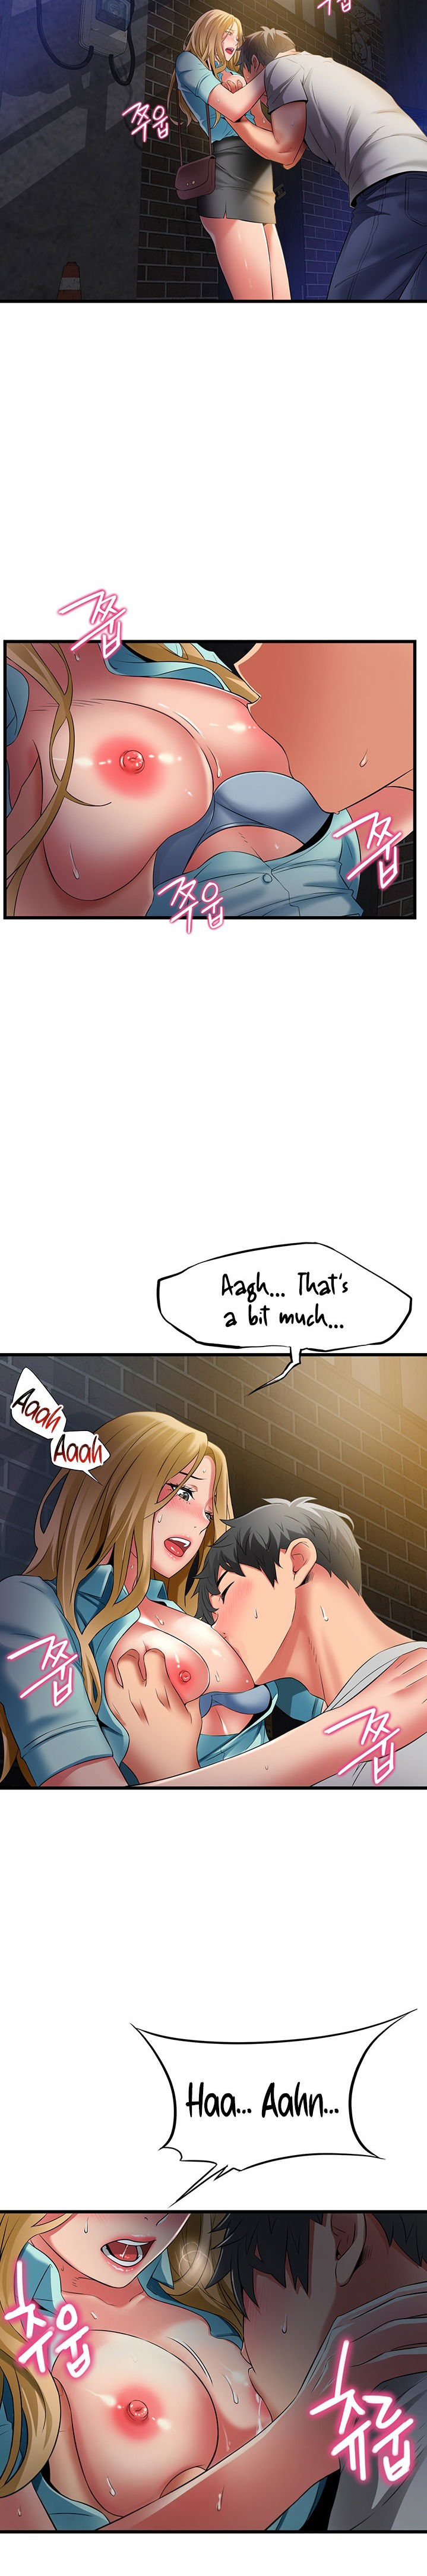 an-alley-story-chap-34-3